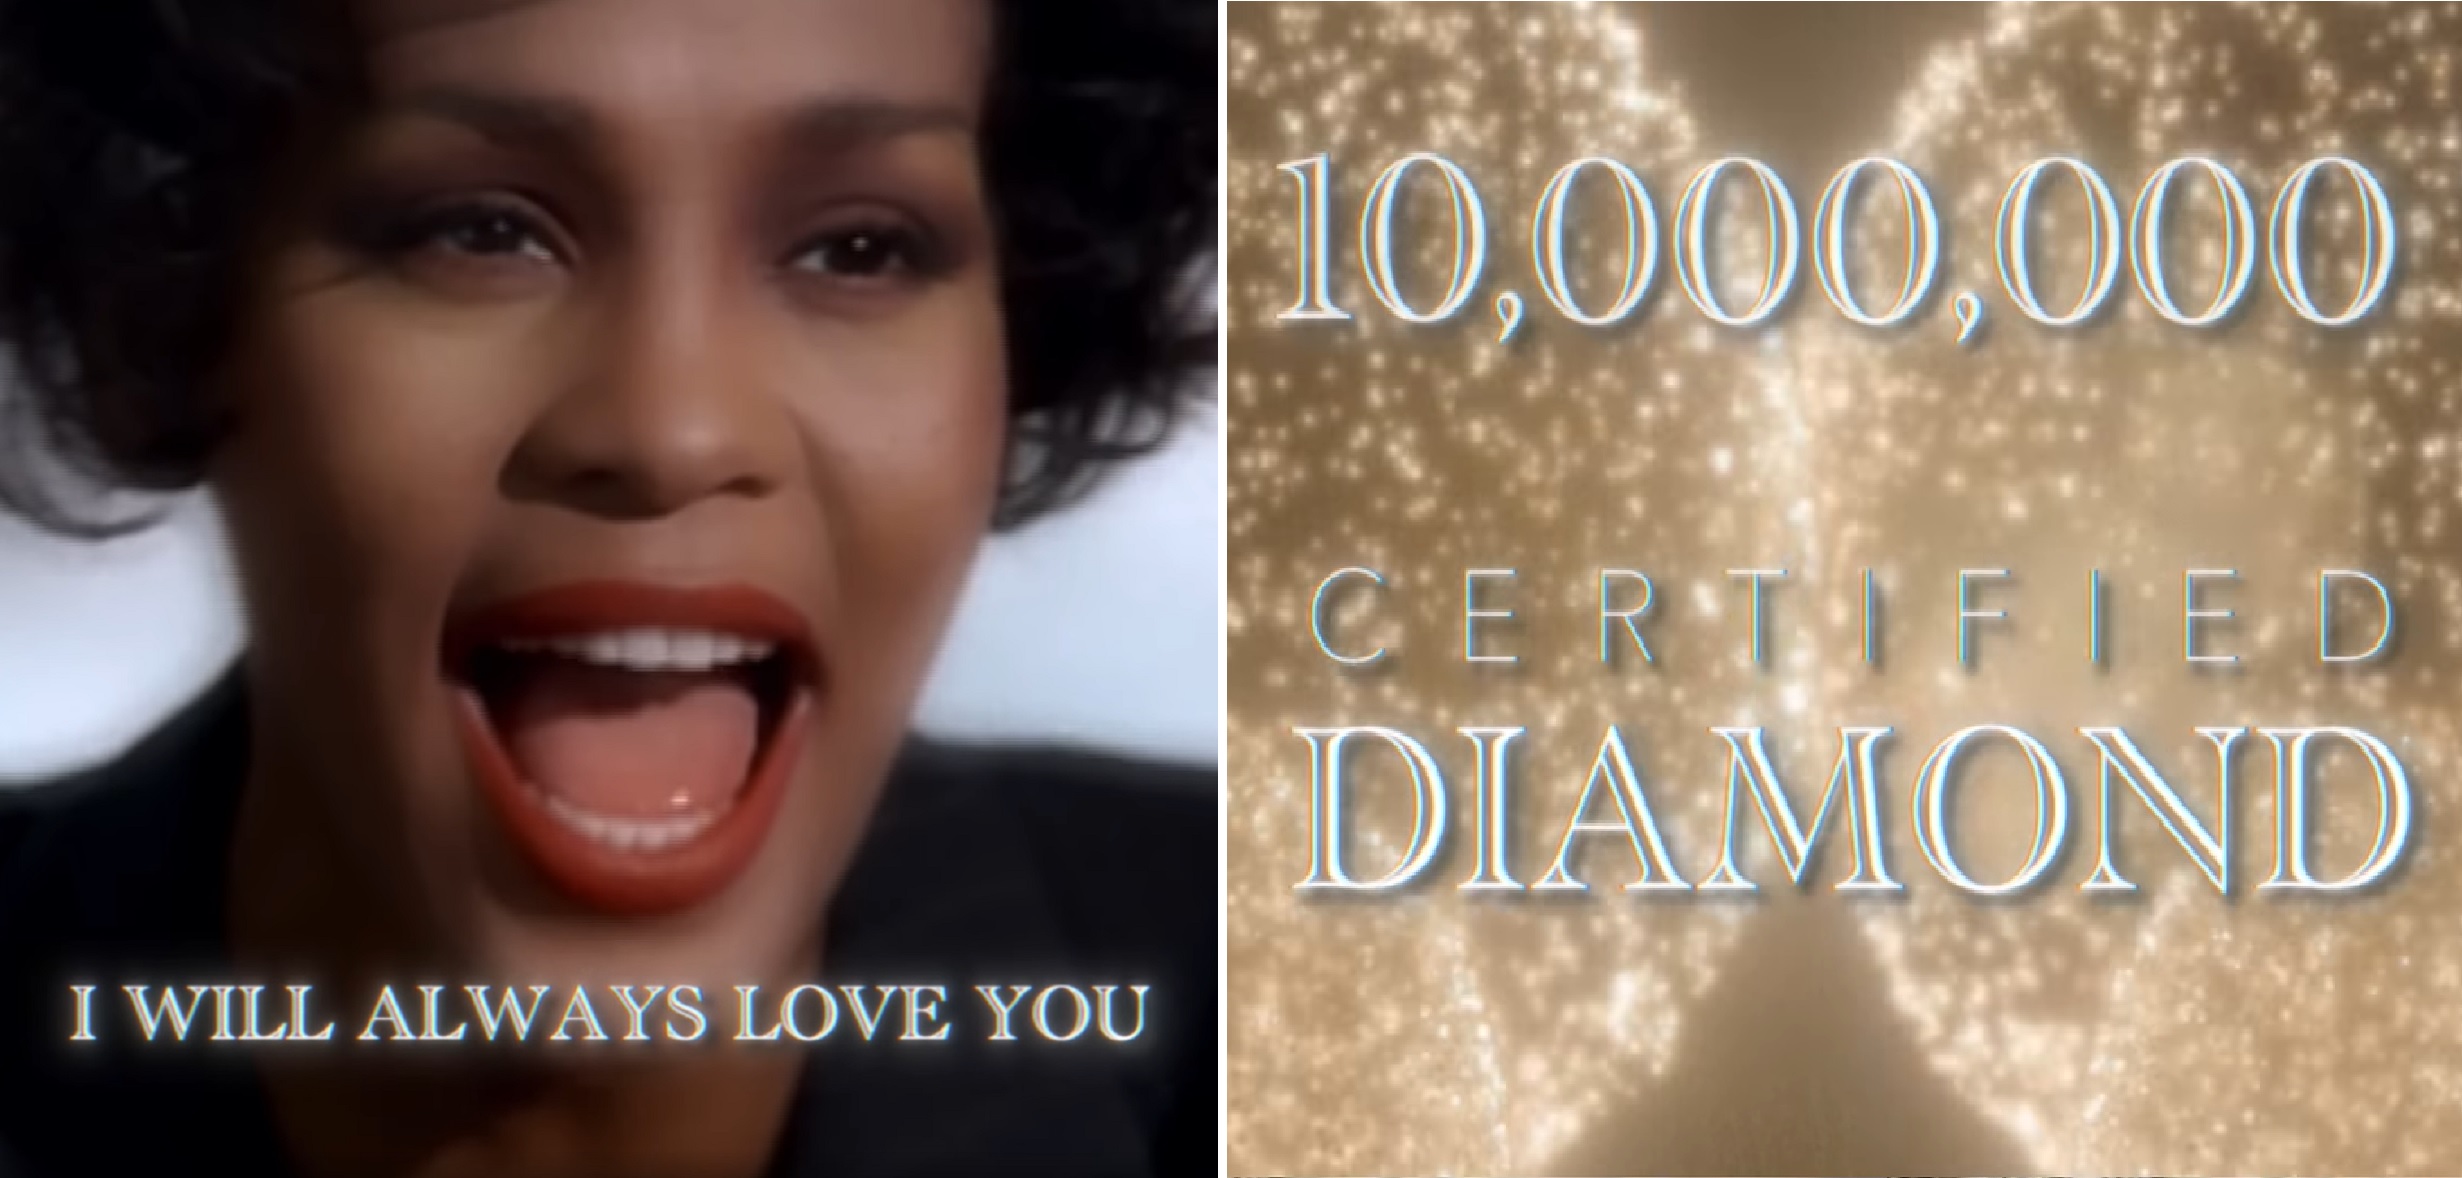 Whitney Houston’s ‘I Will Always Love You’ Certified Diamond By RIAA With Over 10 Million Sold In The United States